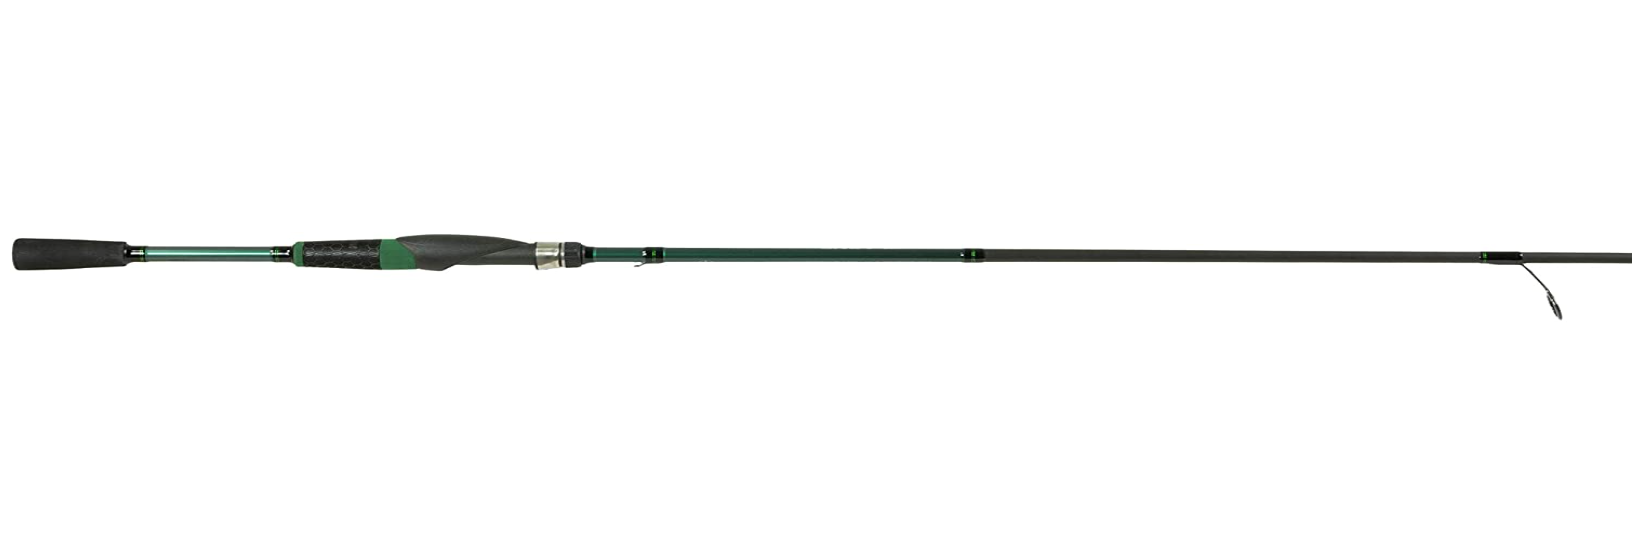 Shimano E Clarus Spinning Rod, 6'6"